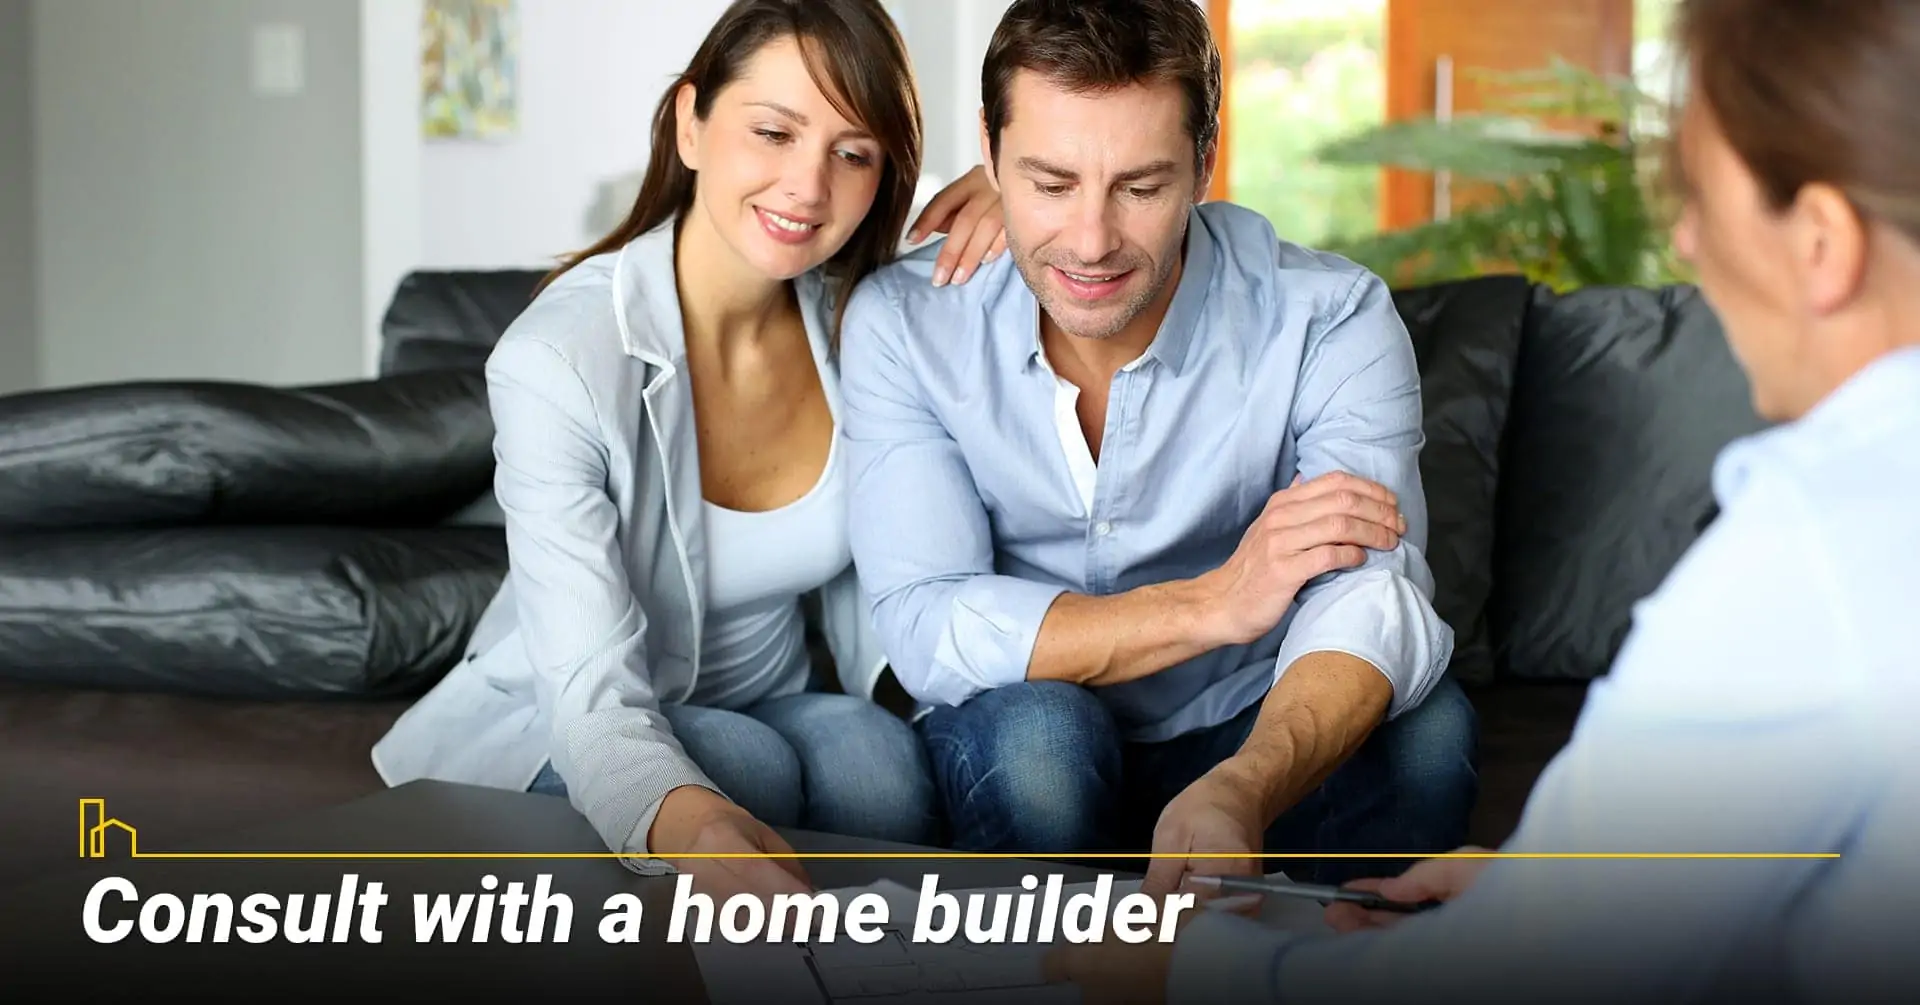 Consult with your home builder, seek advice from the builder